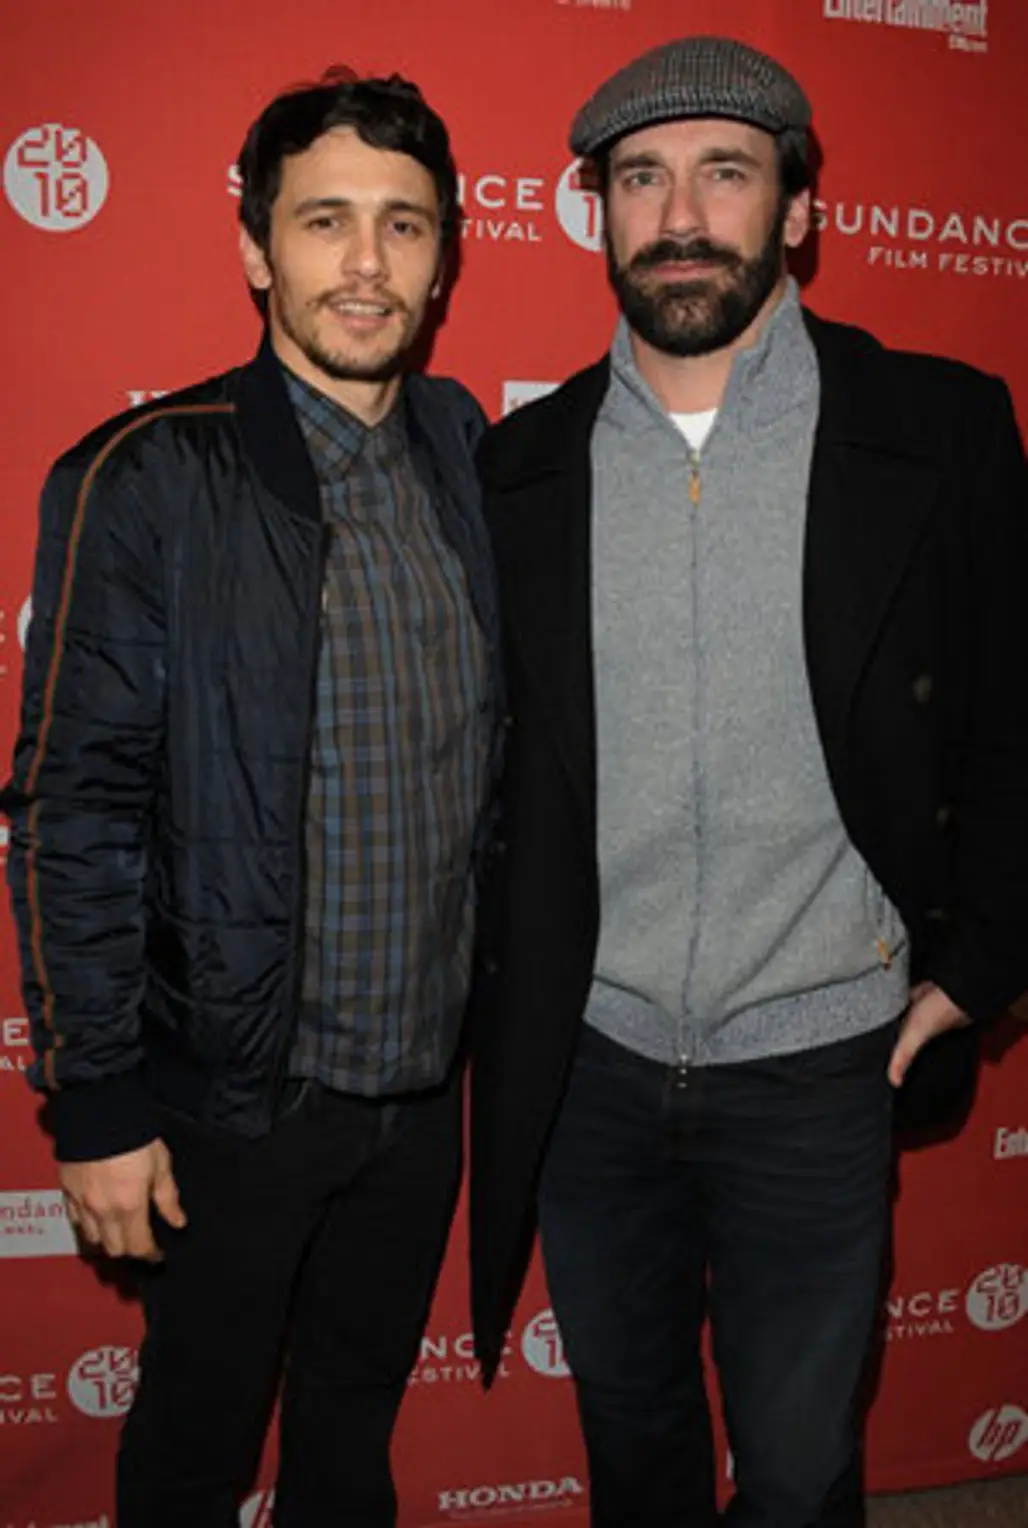 John Hamm and James Franco in One Photo